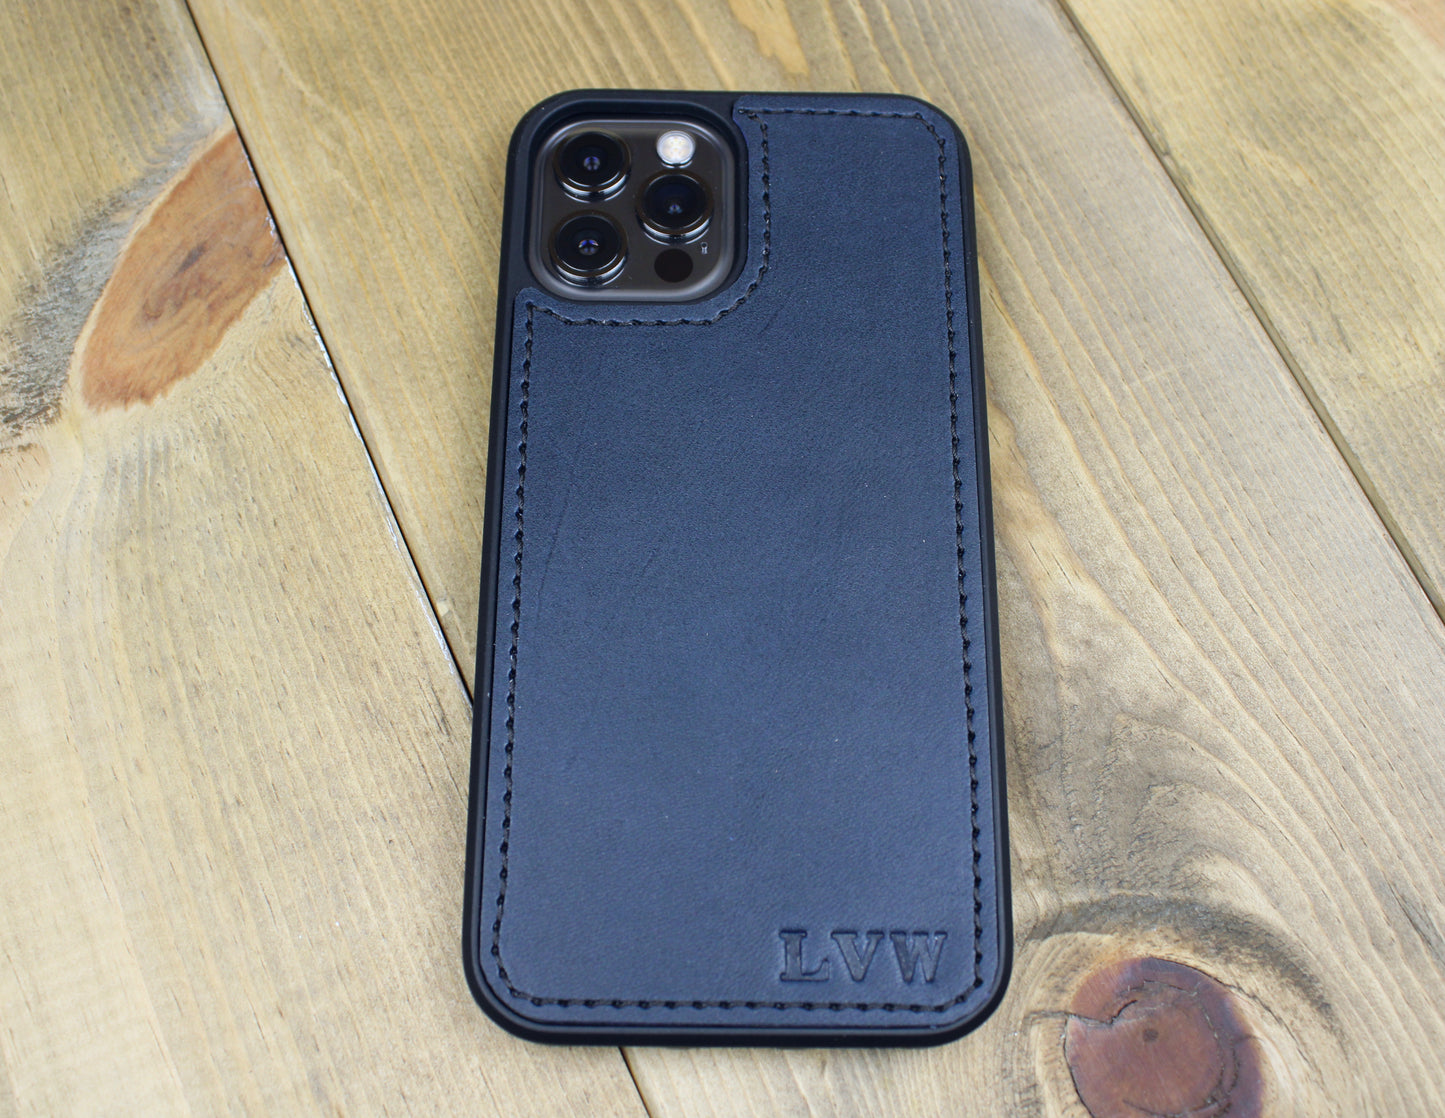 Navy Blue  Leather iPhone case. Handmade leather iPhone case for men or women. iPhone 7, iPhone 8, iPhone SE, iPhone 11, iPhone 11 Pro, iPhone 11 Pro max, iPhone 12, iPhone 12 Pro, iPhone 12 Pro max, iPhone 13, iPhone 13 pro, iPhone 13 pro max leather case. 